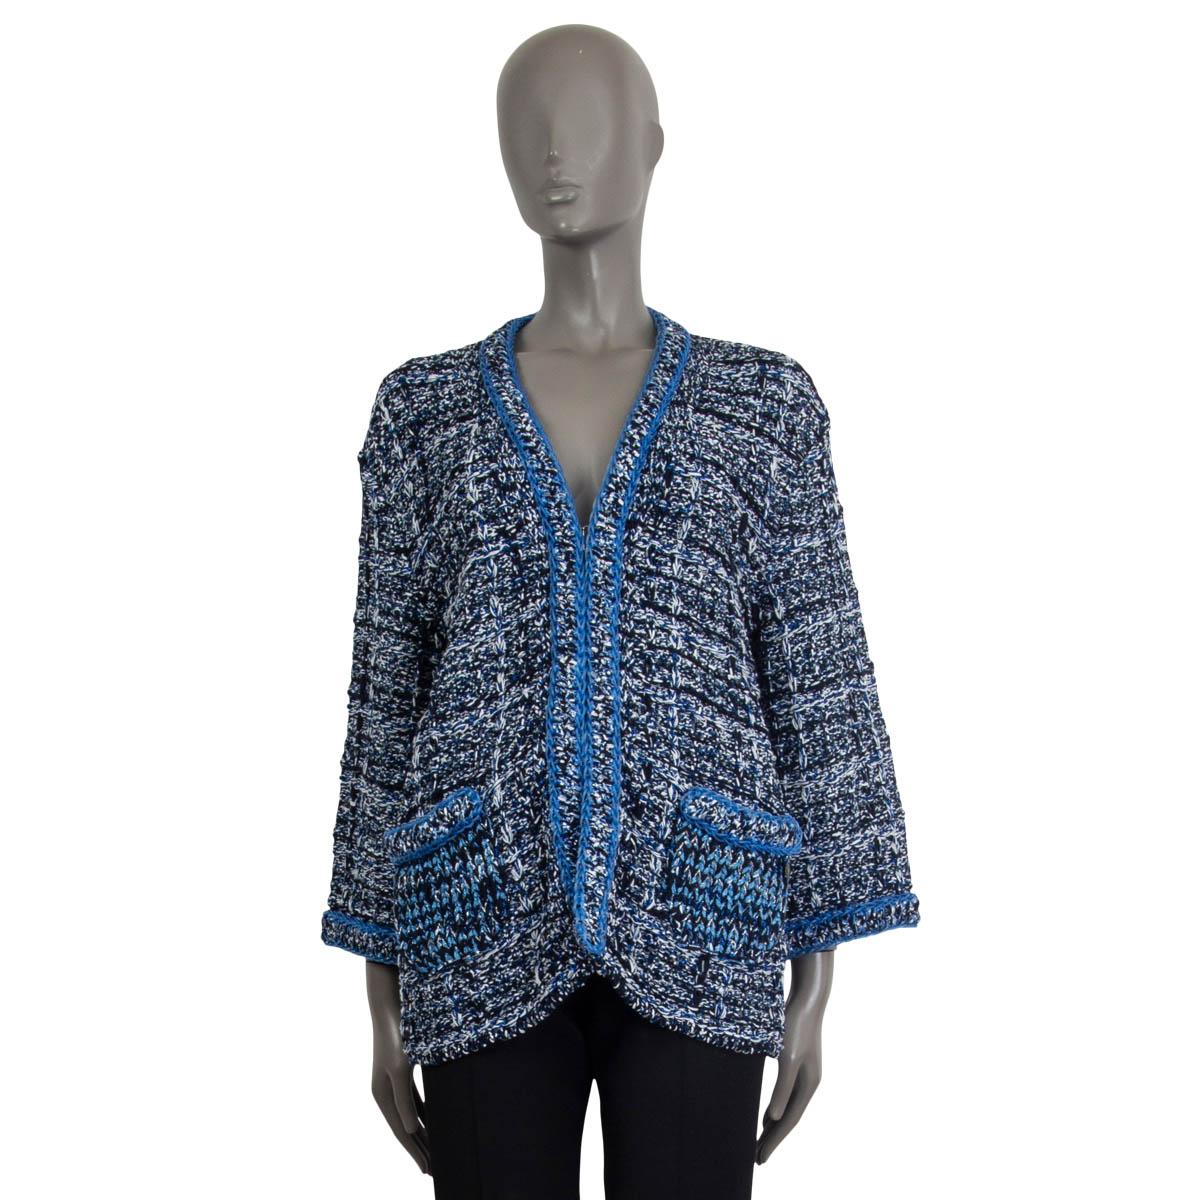 100% authentic Chanel crochet cardigan in blue, black, white and grey cotton (100%). Spring/summer 2017 collection. Embellished with lurex threads and a blue rubber chain on the cuffs, pockets and the collar. Comes with two slit pockets, one with CC